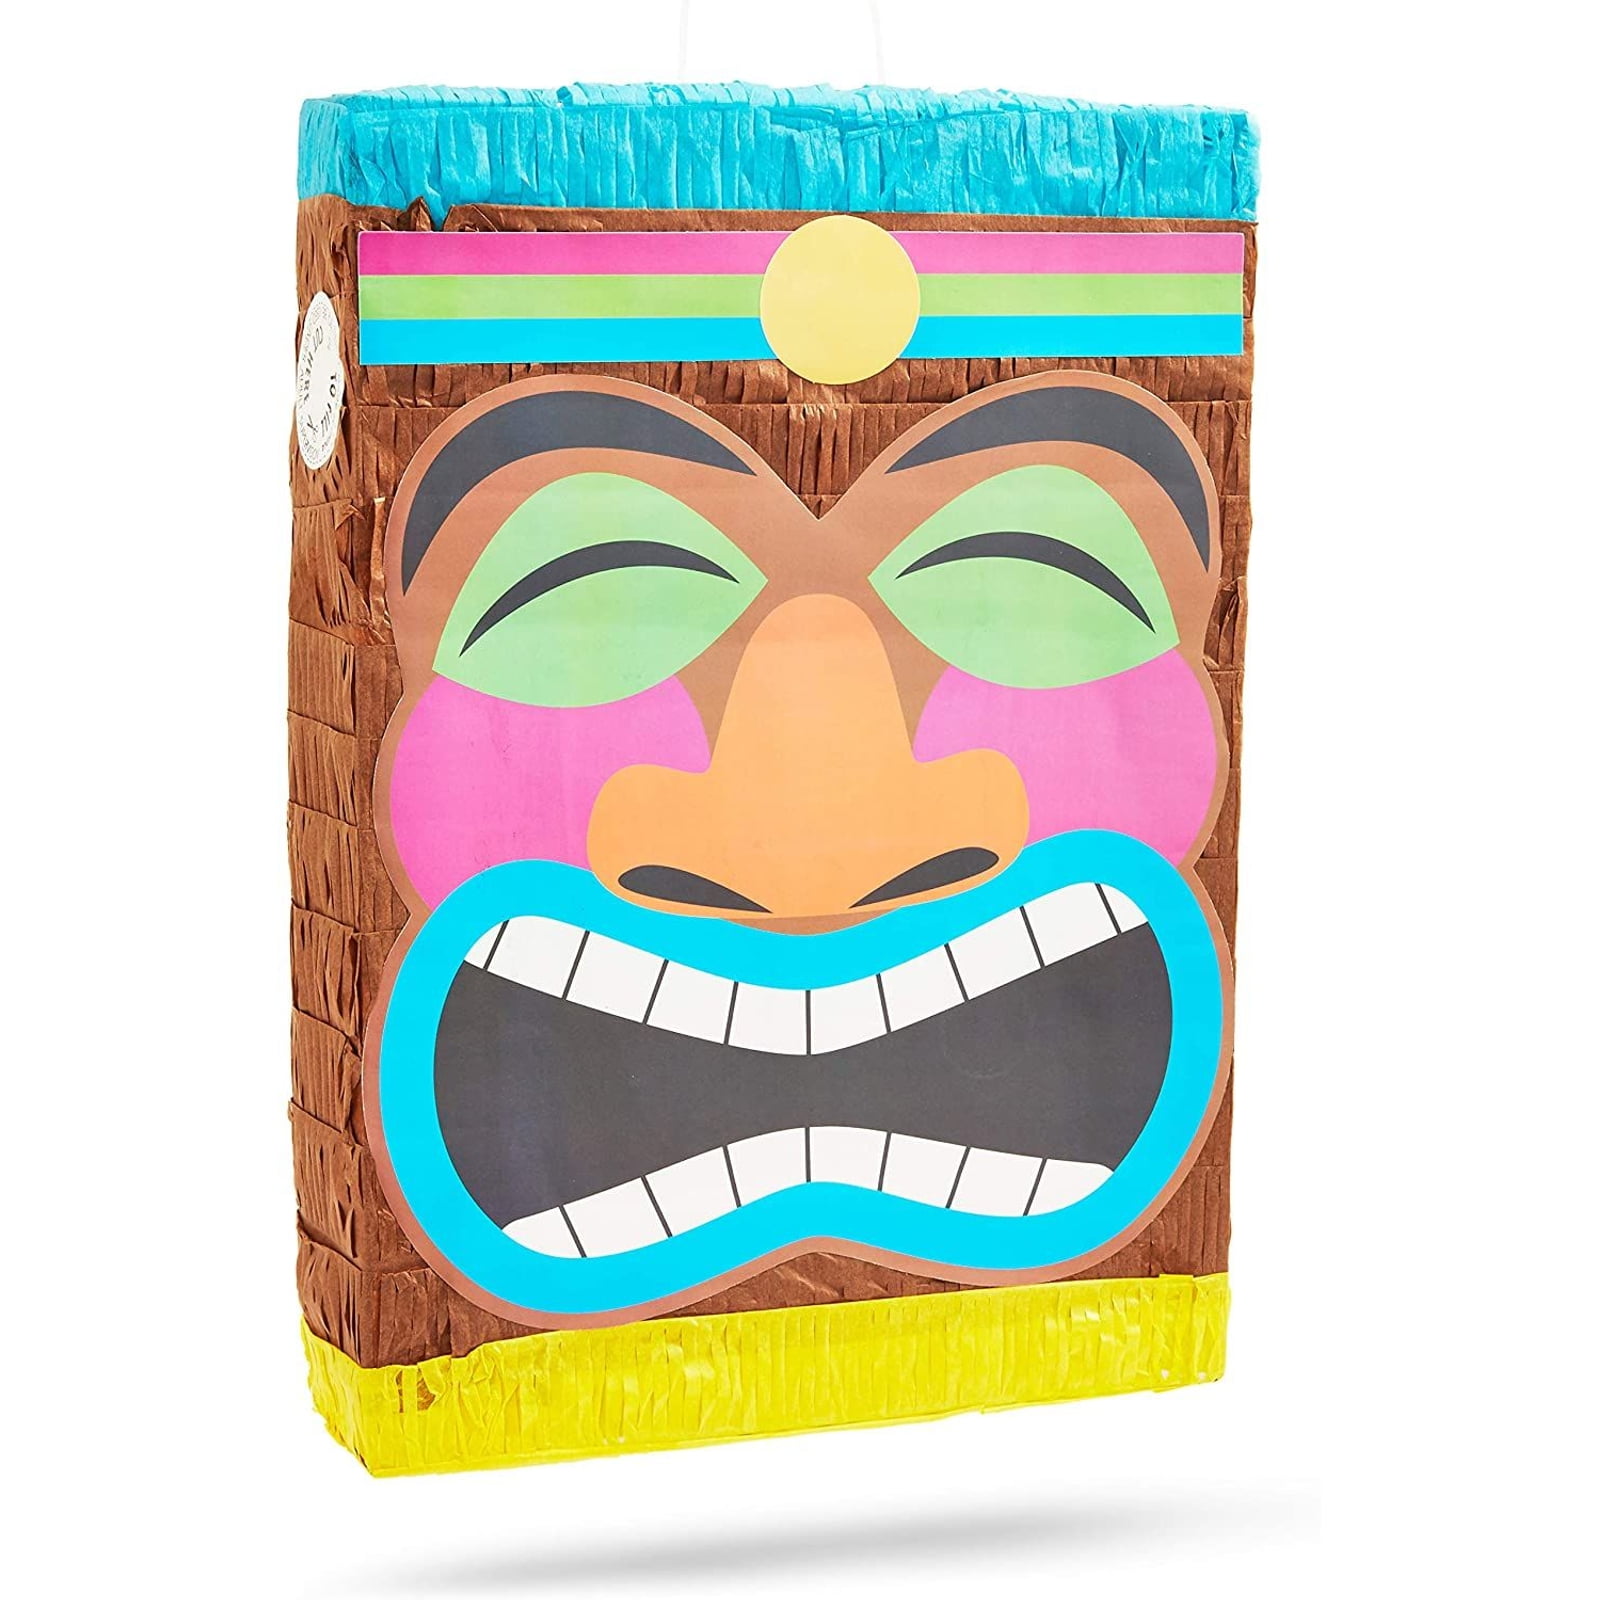 Details about   Funny Luau TIKI HEAD MASK on POTTY Bathroom Door Cover Birthday Party Decoration 